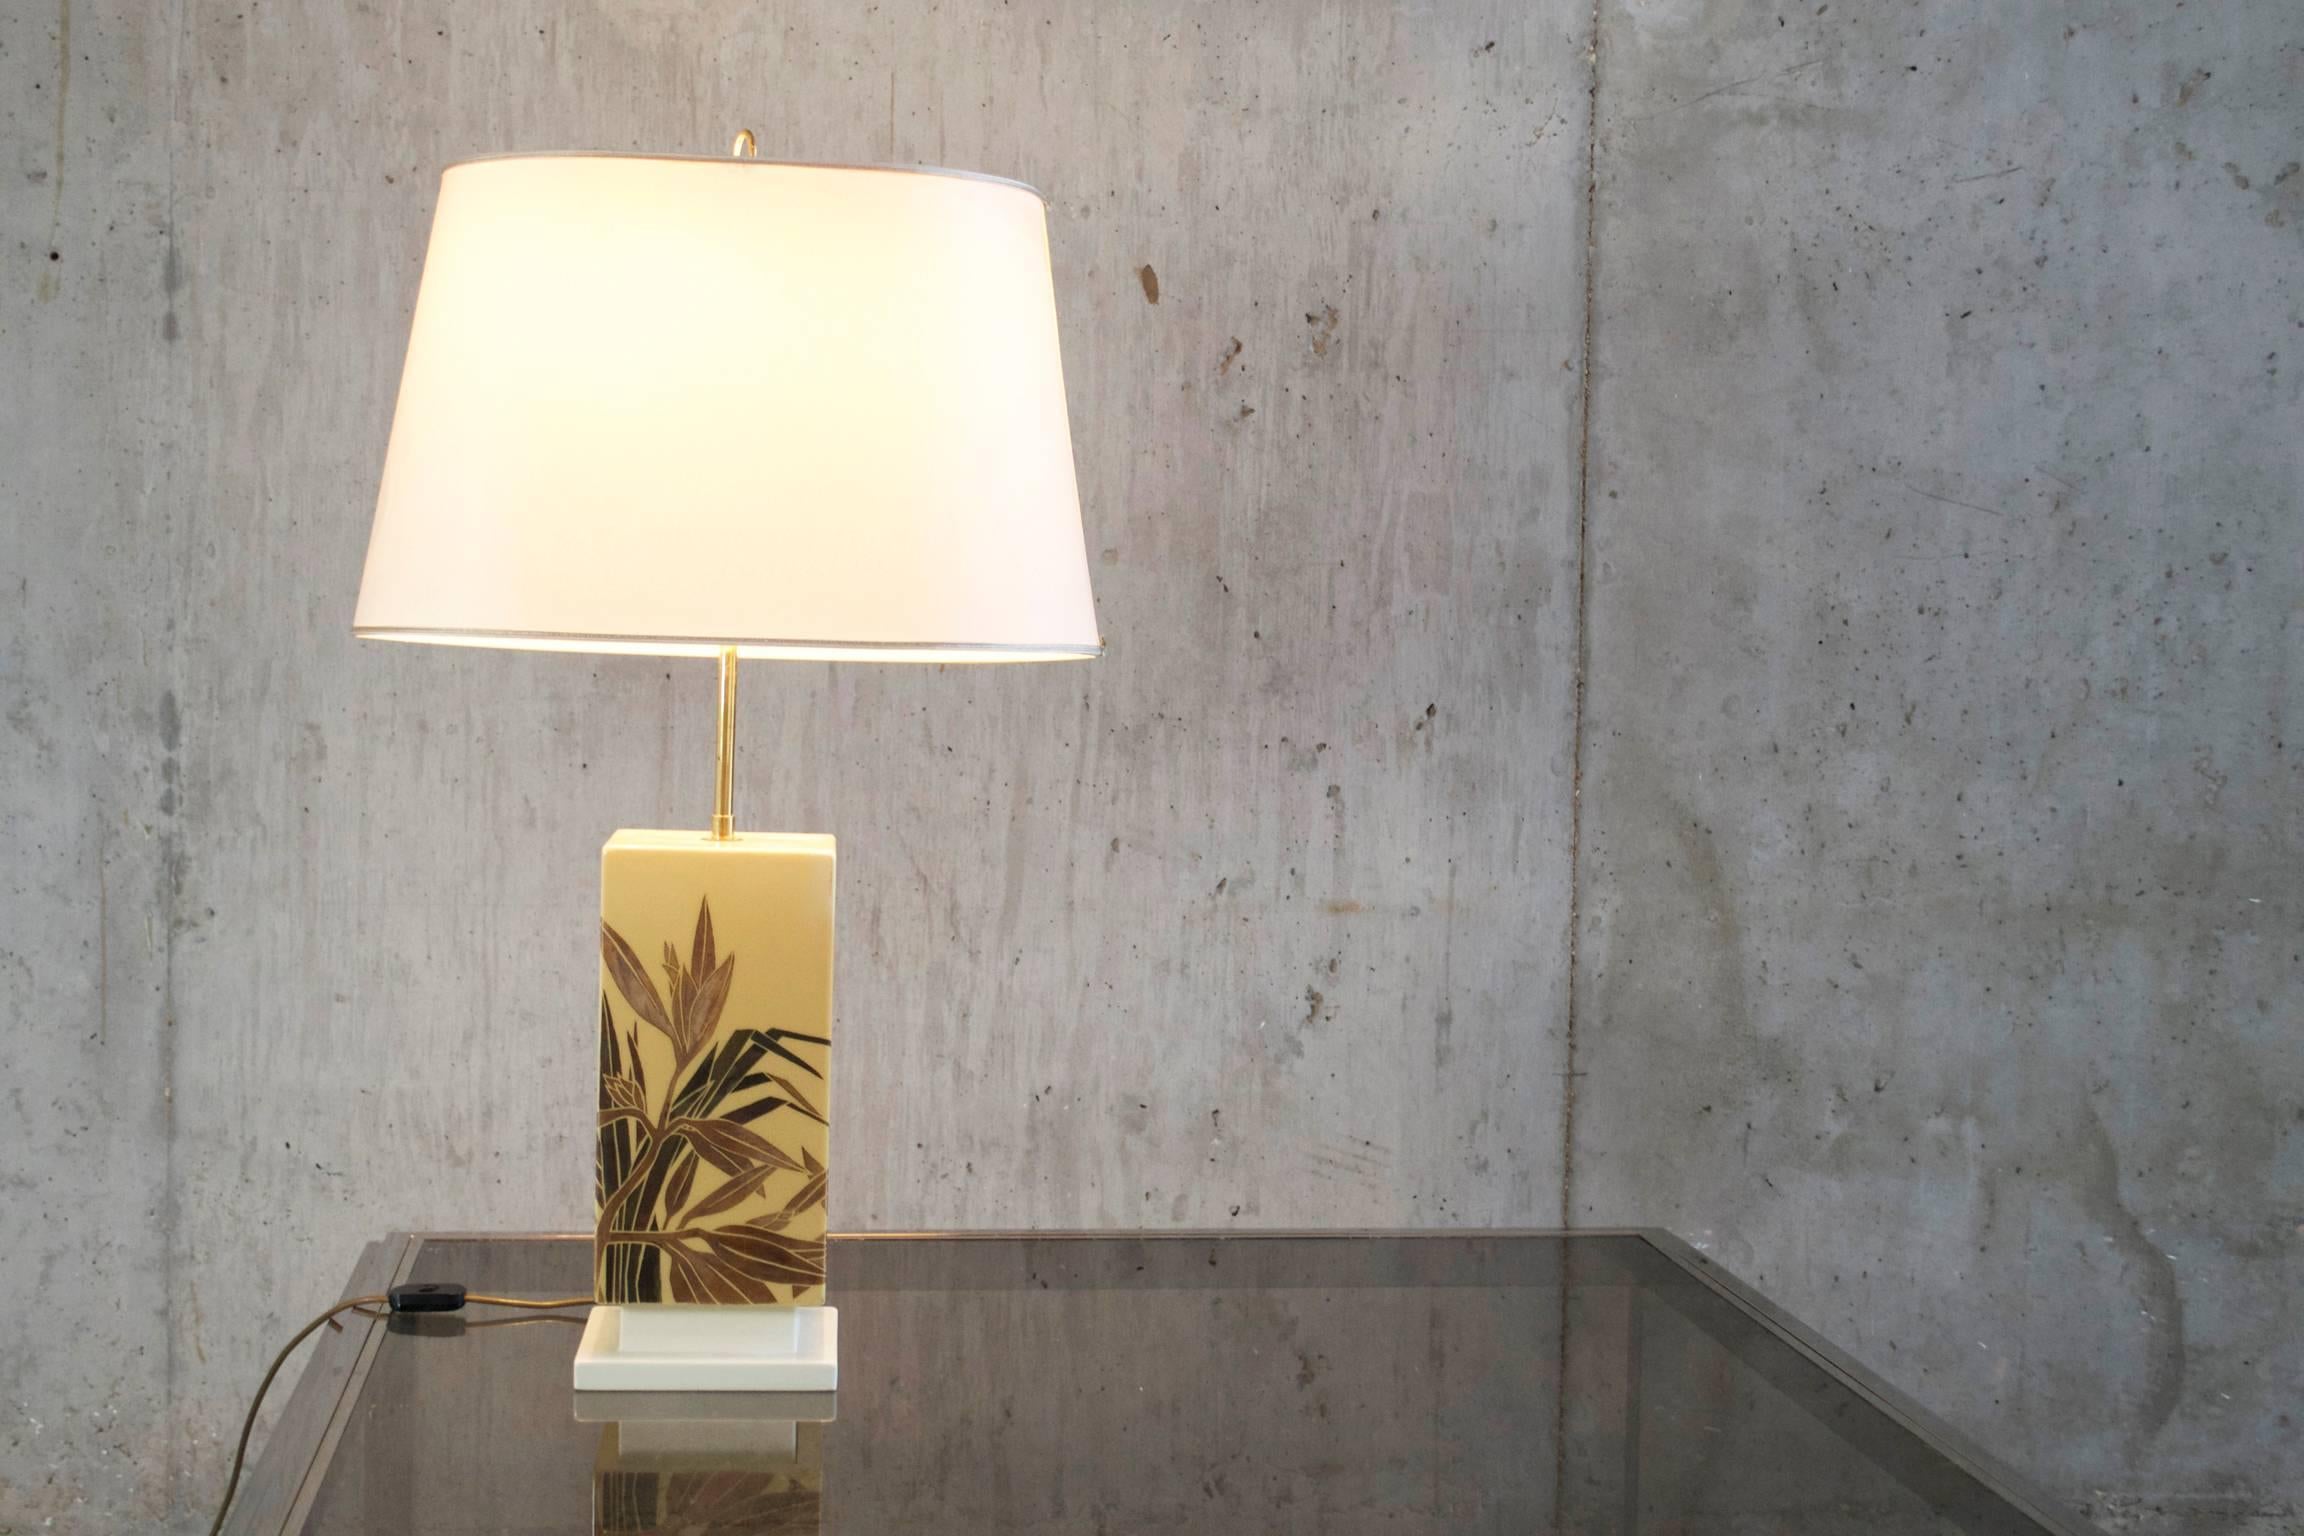 Hand-painted ceramic base with palm leaf motif. The lamp has an elegant cream shade with a thin gold braid edge and a hoop brass finial.